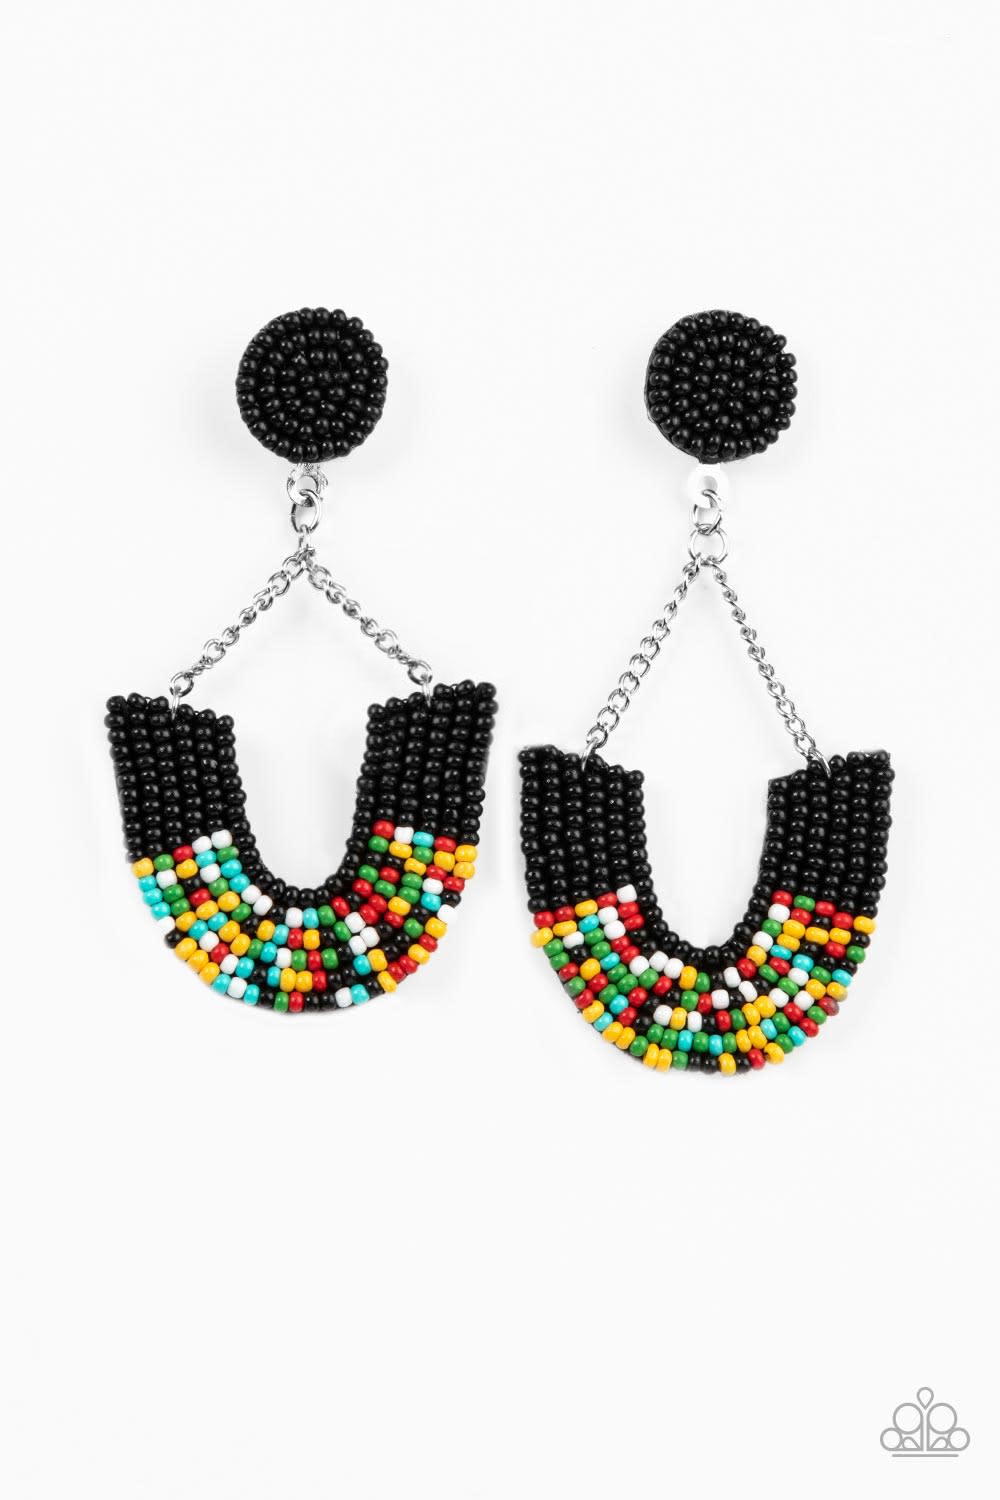 Make it RAINBOW Black Earring - Paparazzi Accessories  Adorned in sections of black and multicolored seed beaded accents, a colorful rainbow swings from the bottom of shimmery silver chains that attach to a black seed beaded disc for a bohemian inspired fashion. Earring attaches to a standard post fitting.  Sold as one pair of post earrings.